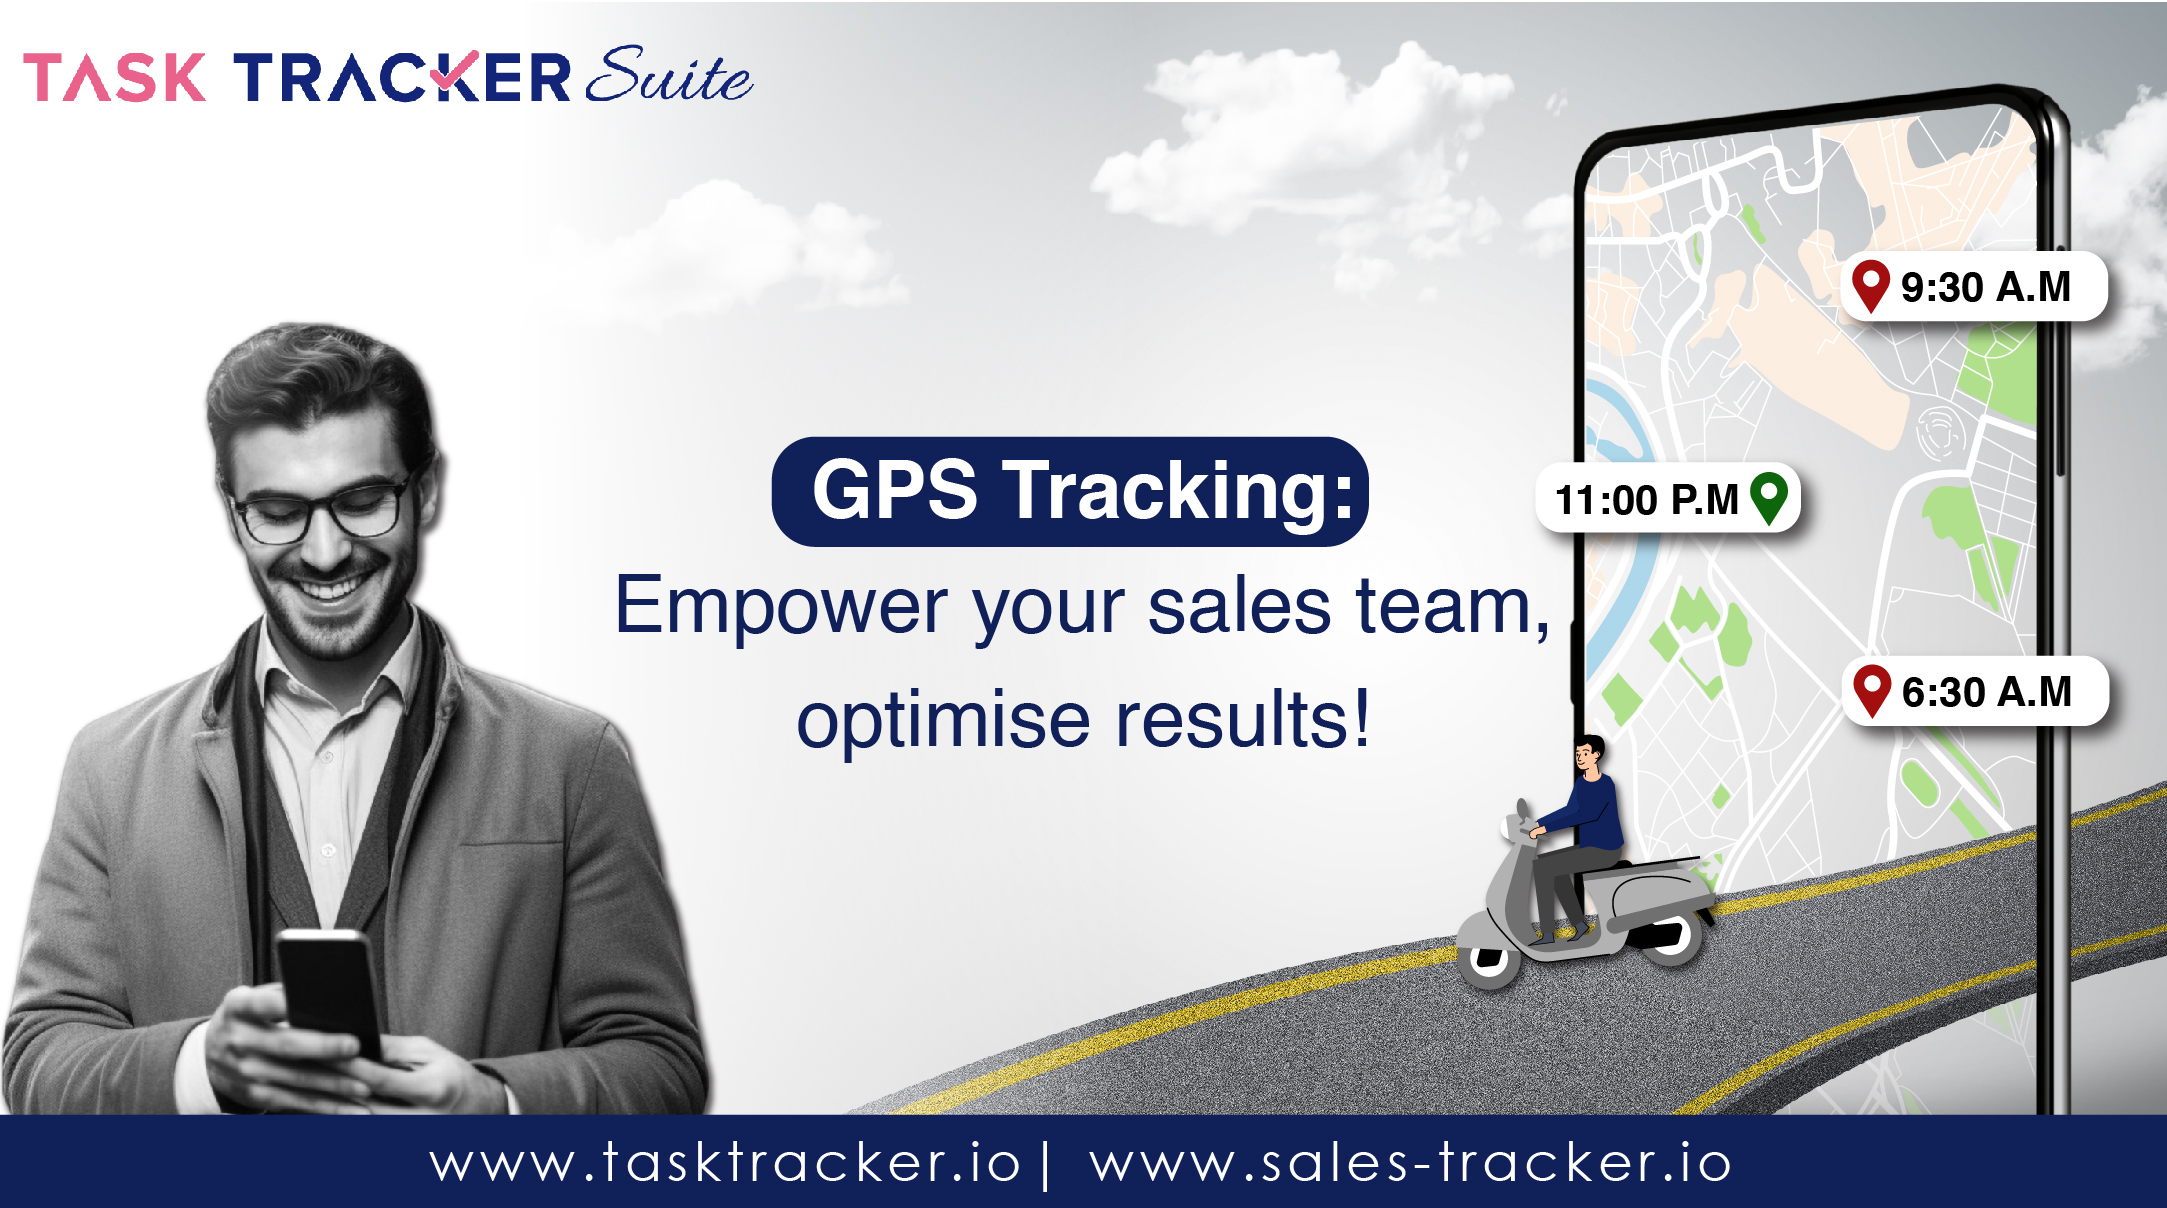 How Location Tracking Can Improve Sales Team’s Productivity And Performance